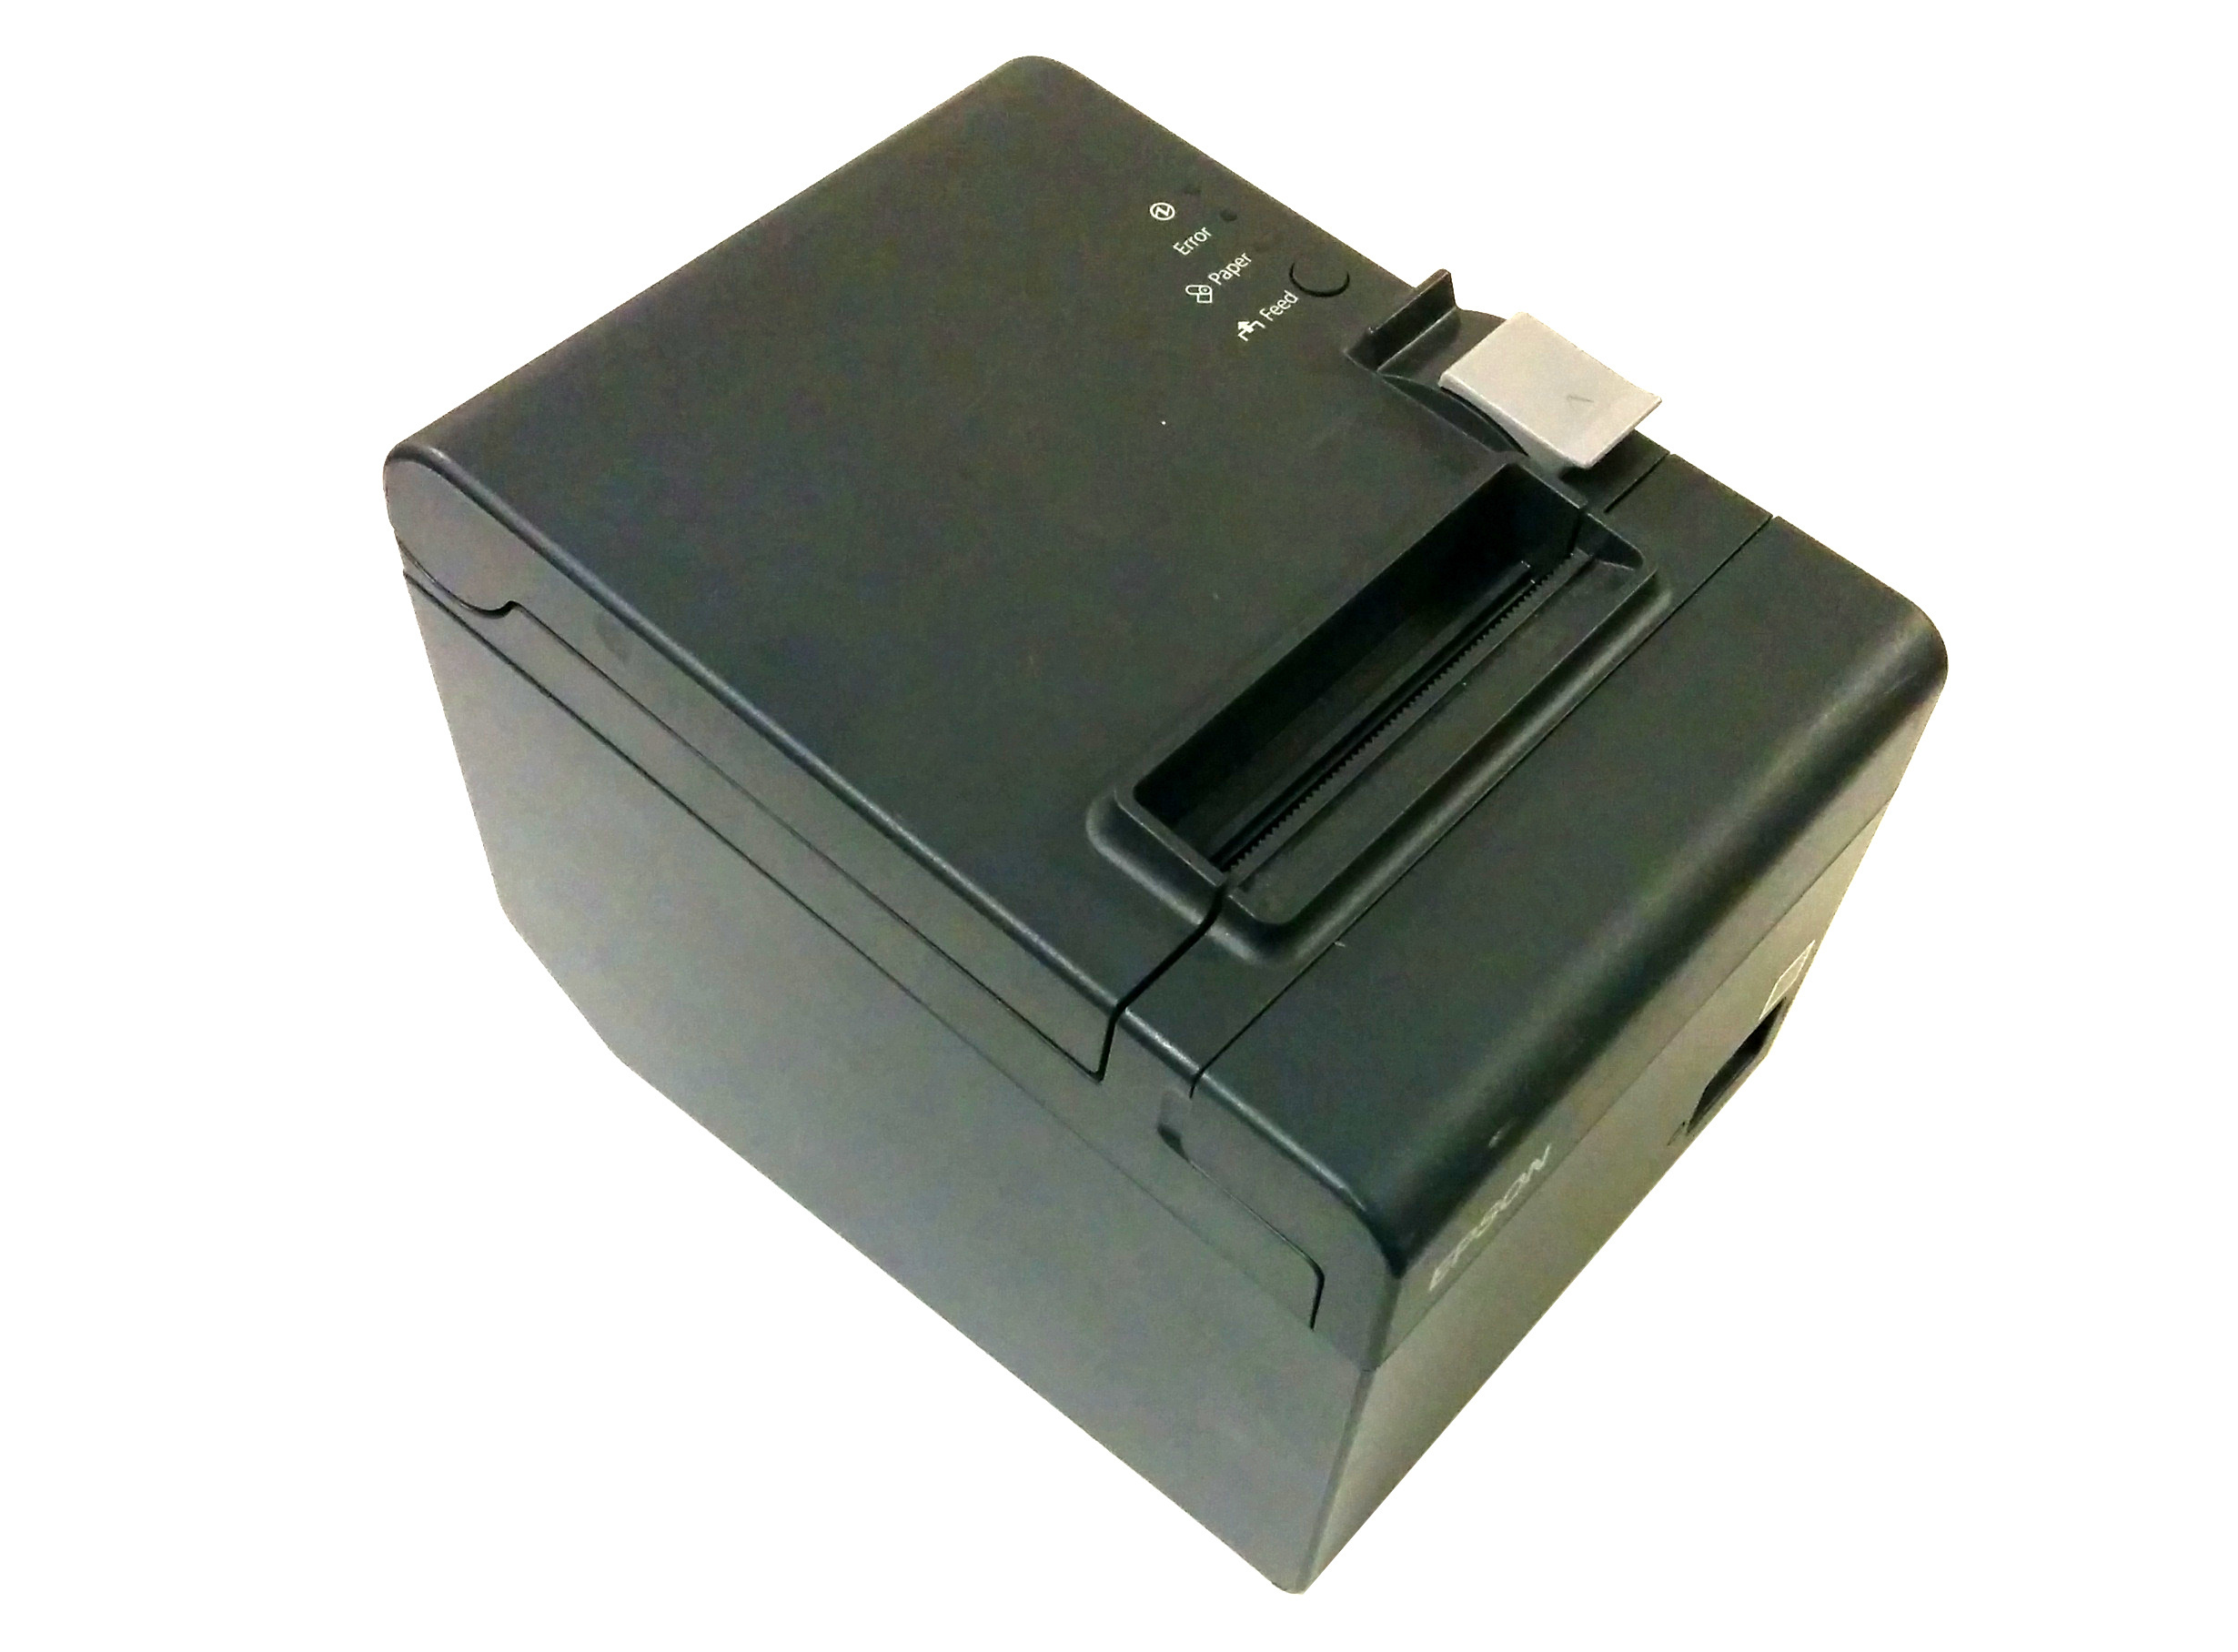 how do i get an ip address for a pos 80 thermal printer